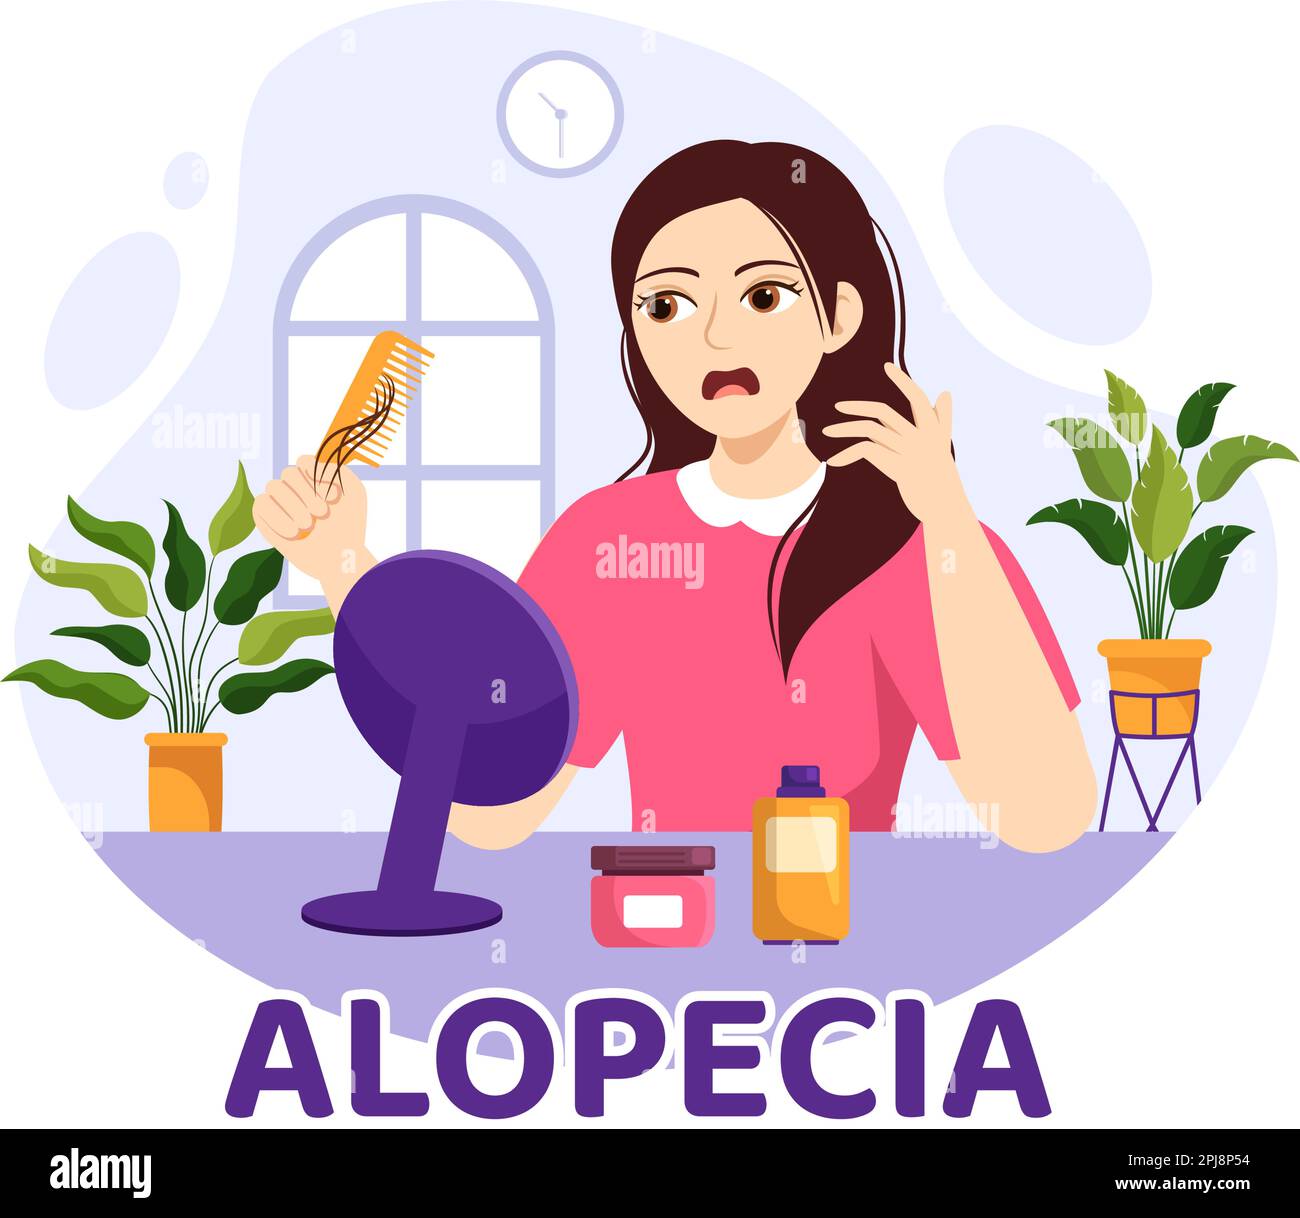 Alopecia Illustration with Hair Loss Autoimmune Medical Disease and Baldness in Healthcare Flat Cartoon Hand Drawn Banner or Landing Page Templates Stock Vector